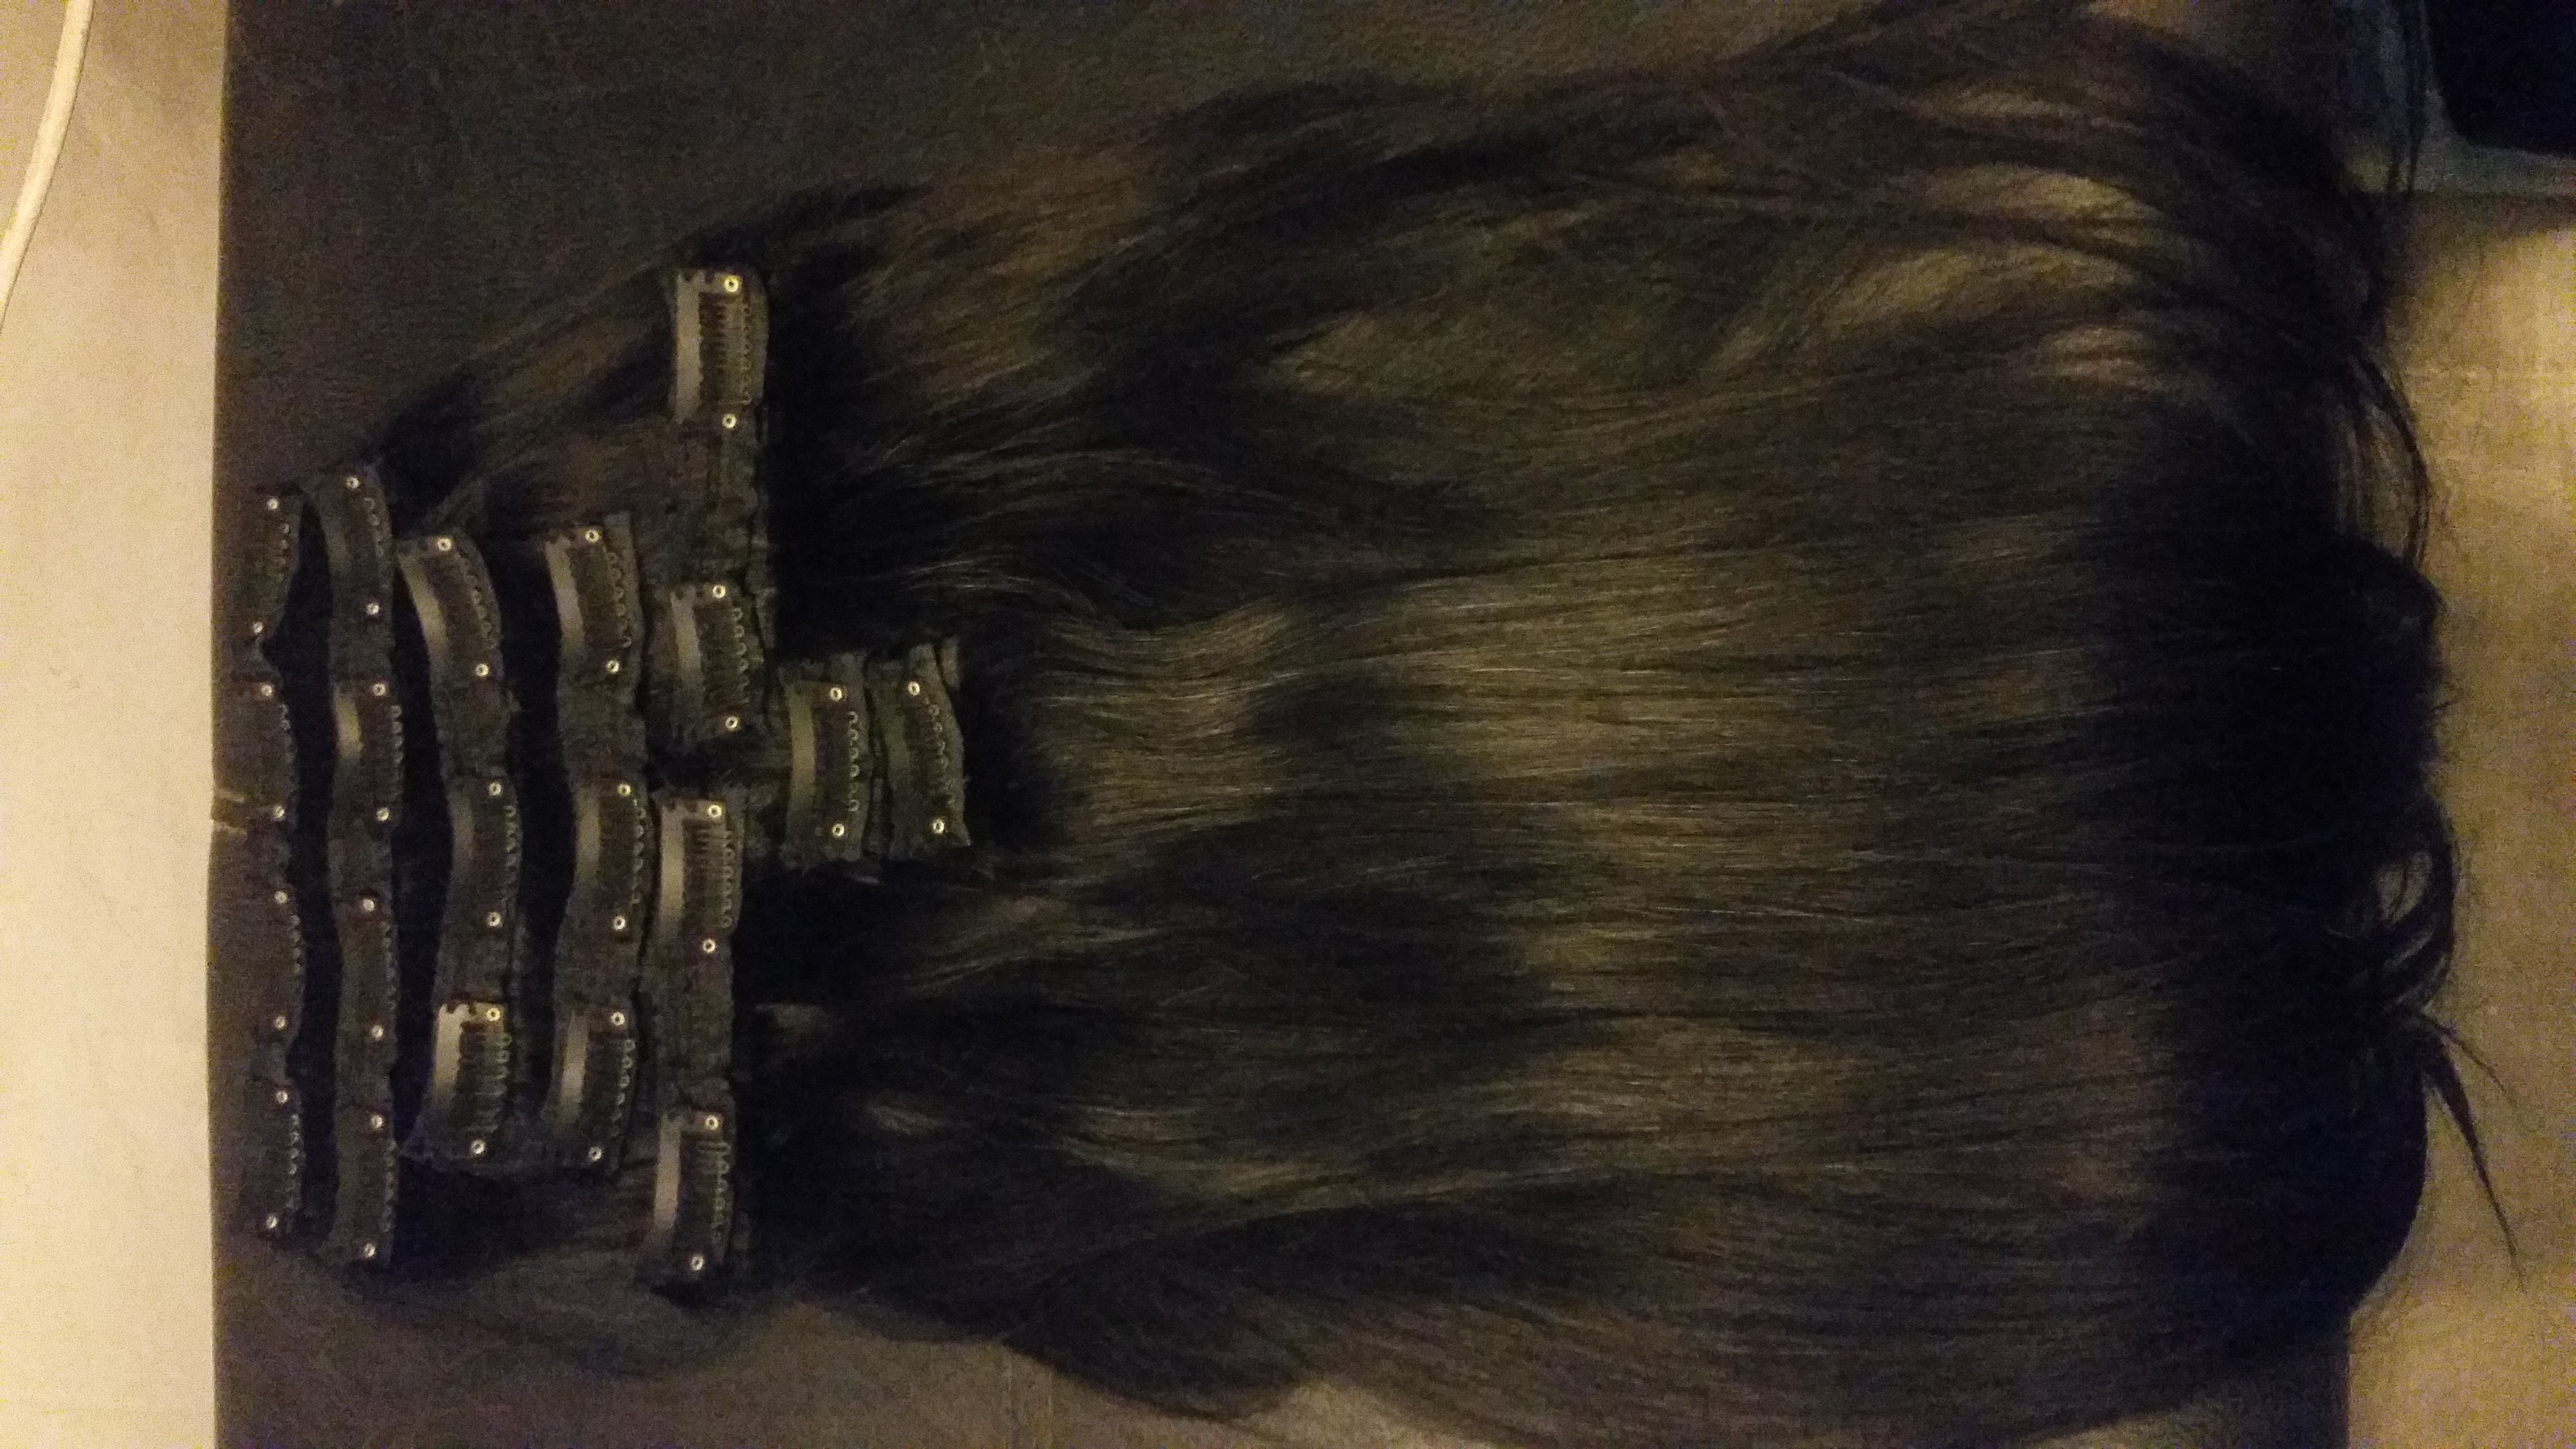 Clip on Hair Extensions